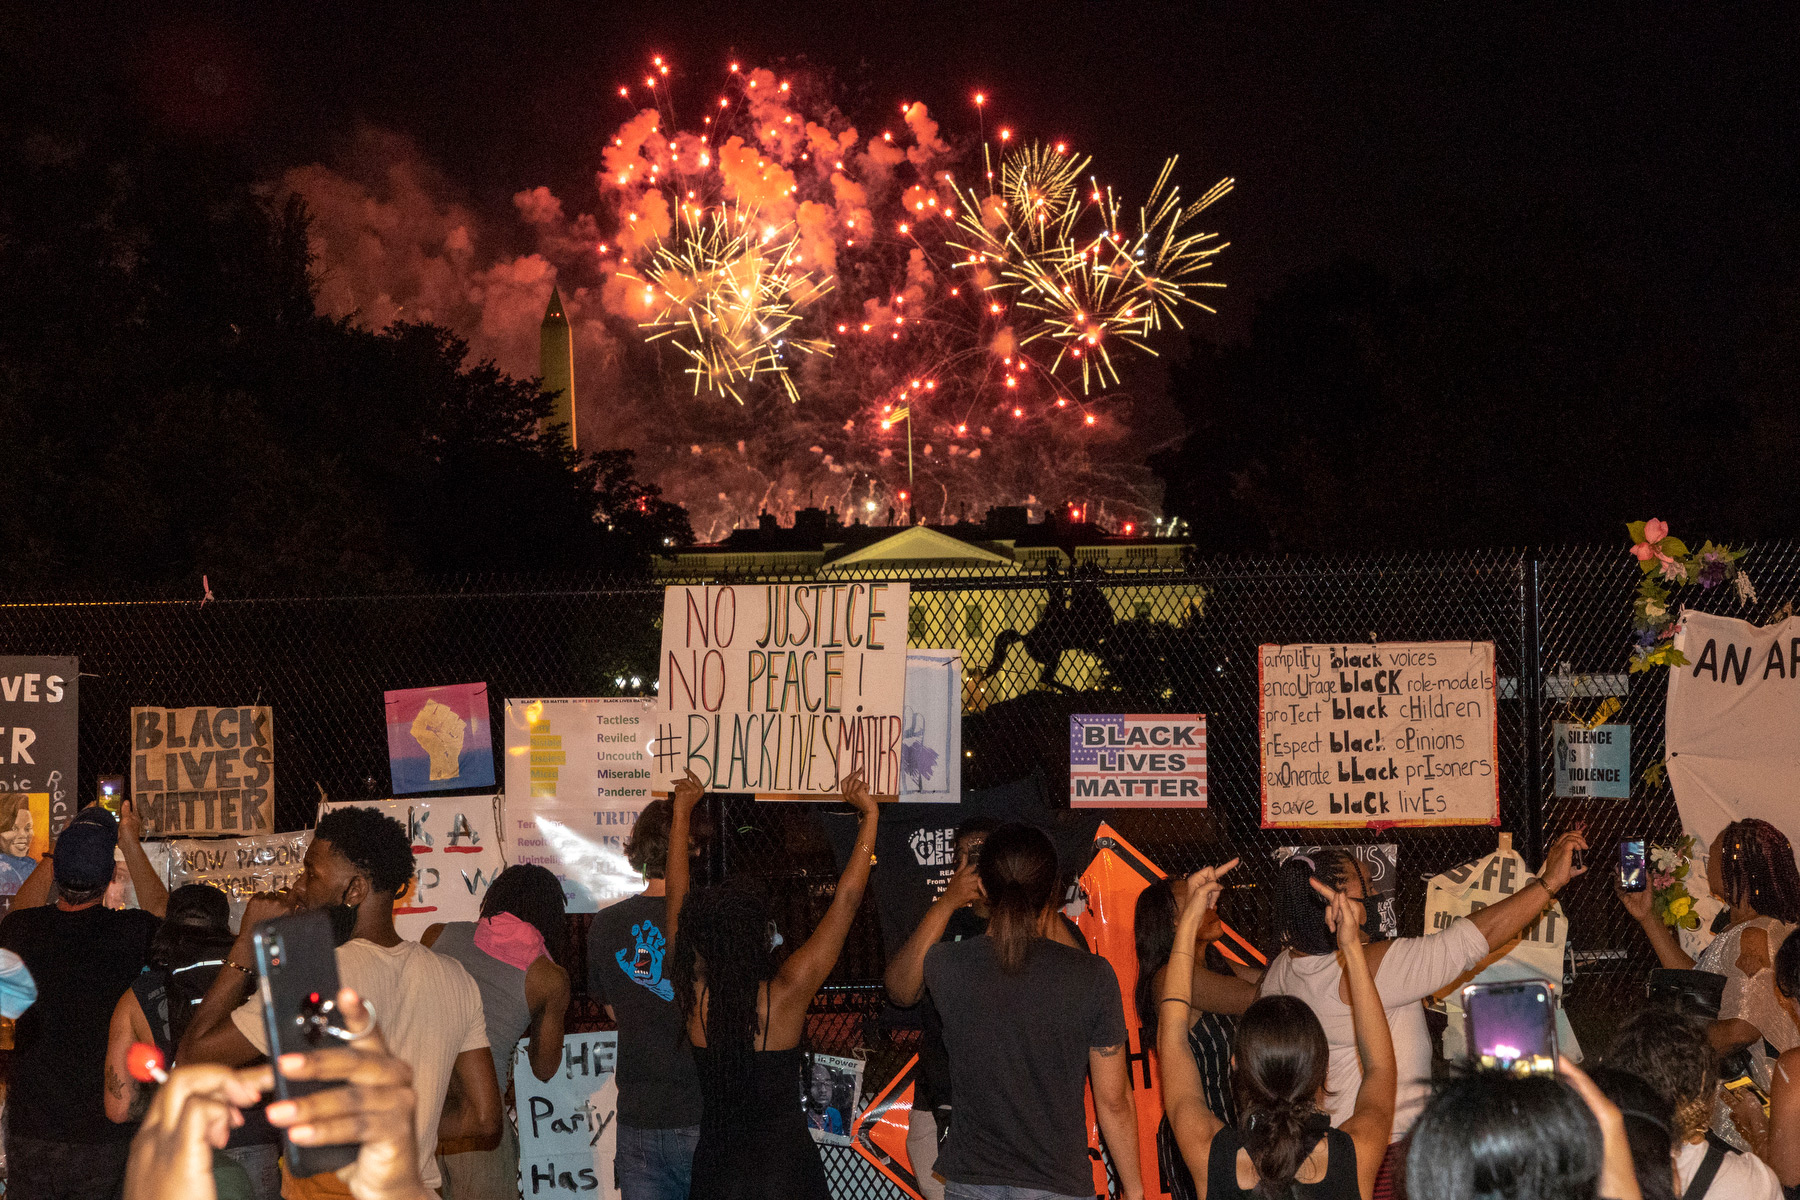 2020. Washington DC. USA. Protestors gather at Black Lives Matter Plaza in Washington DC near the White House on the evening of the last night of the RNC. Donald Trump accepted the Republican party nomination, followed by celebratory fireworks.